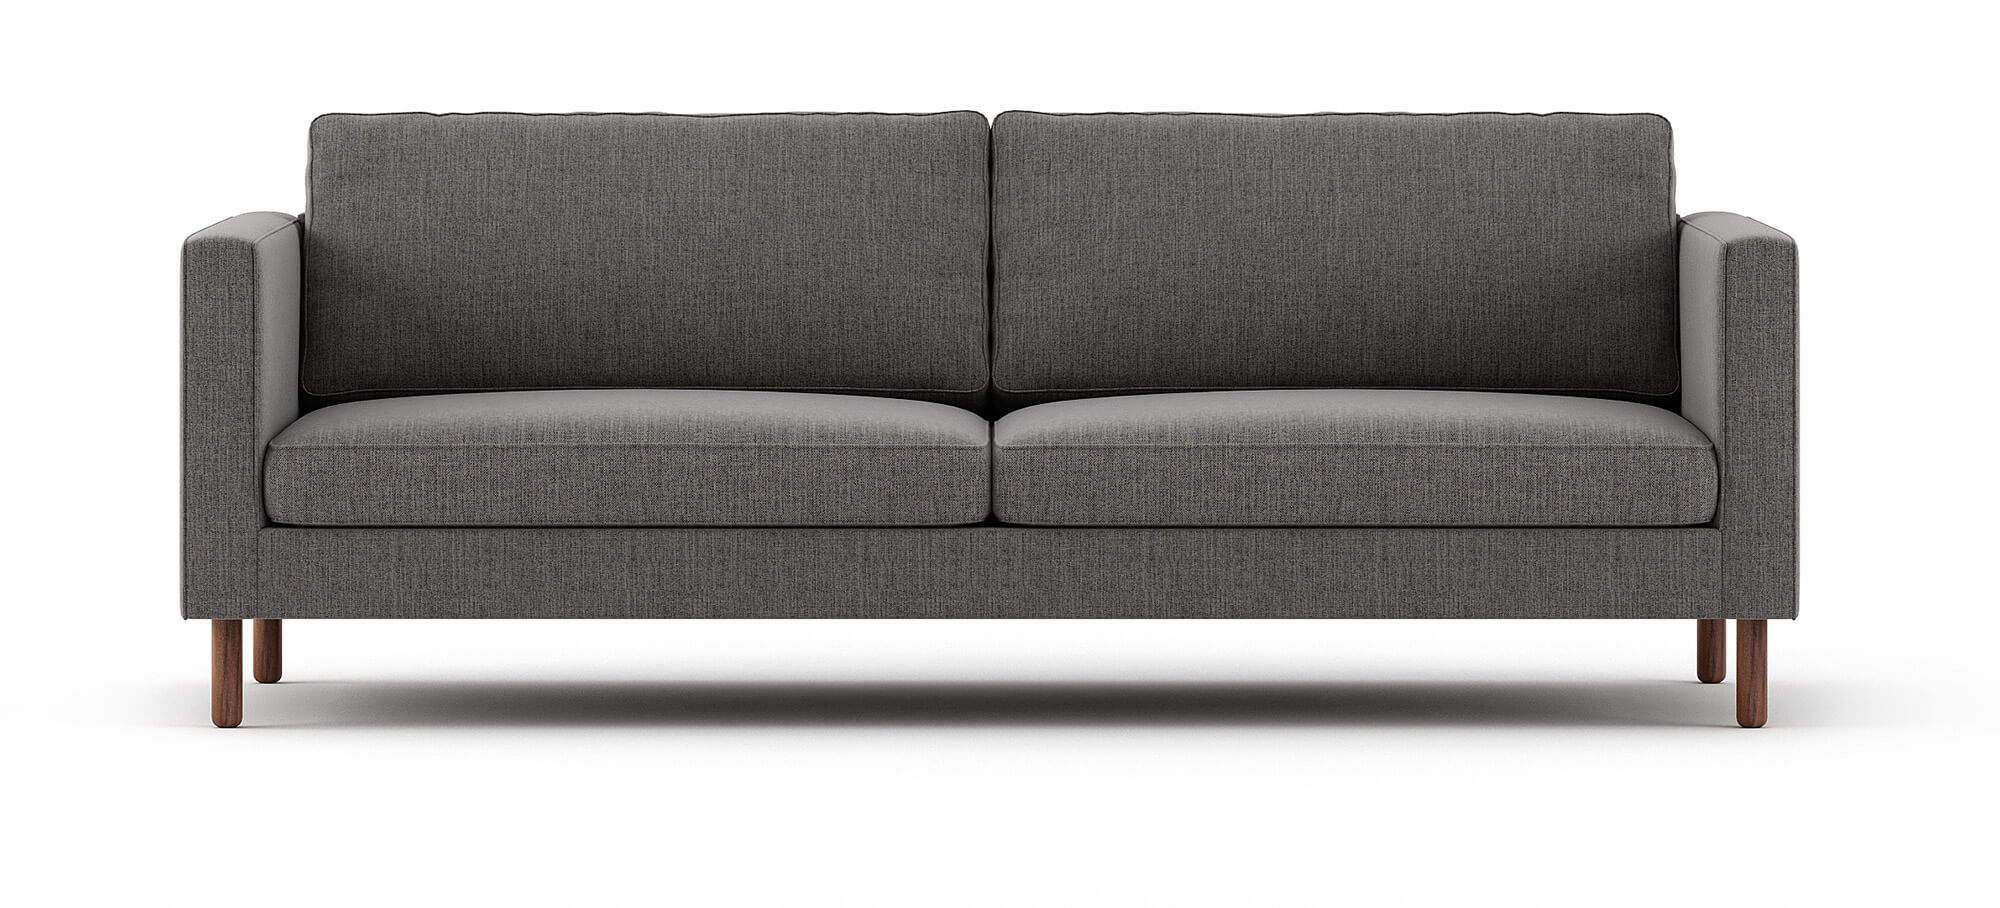 Mota Sofa By Medley Eco Friendly Sustainable Furniture With Organic Non Toxic Options